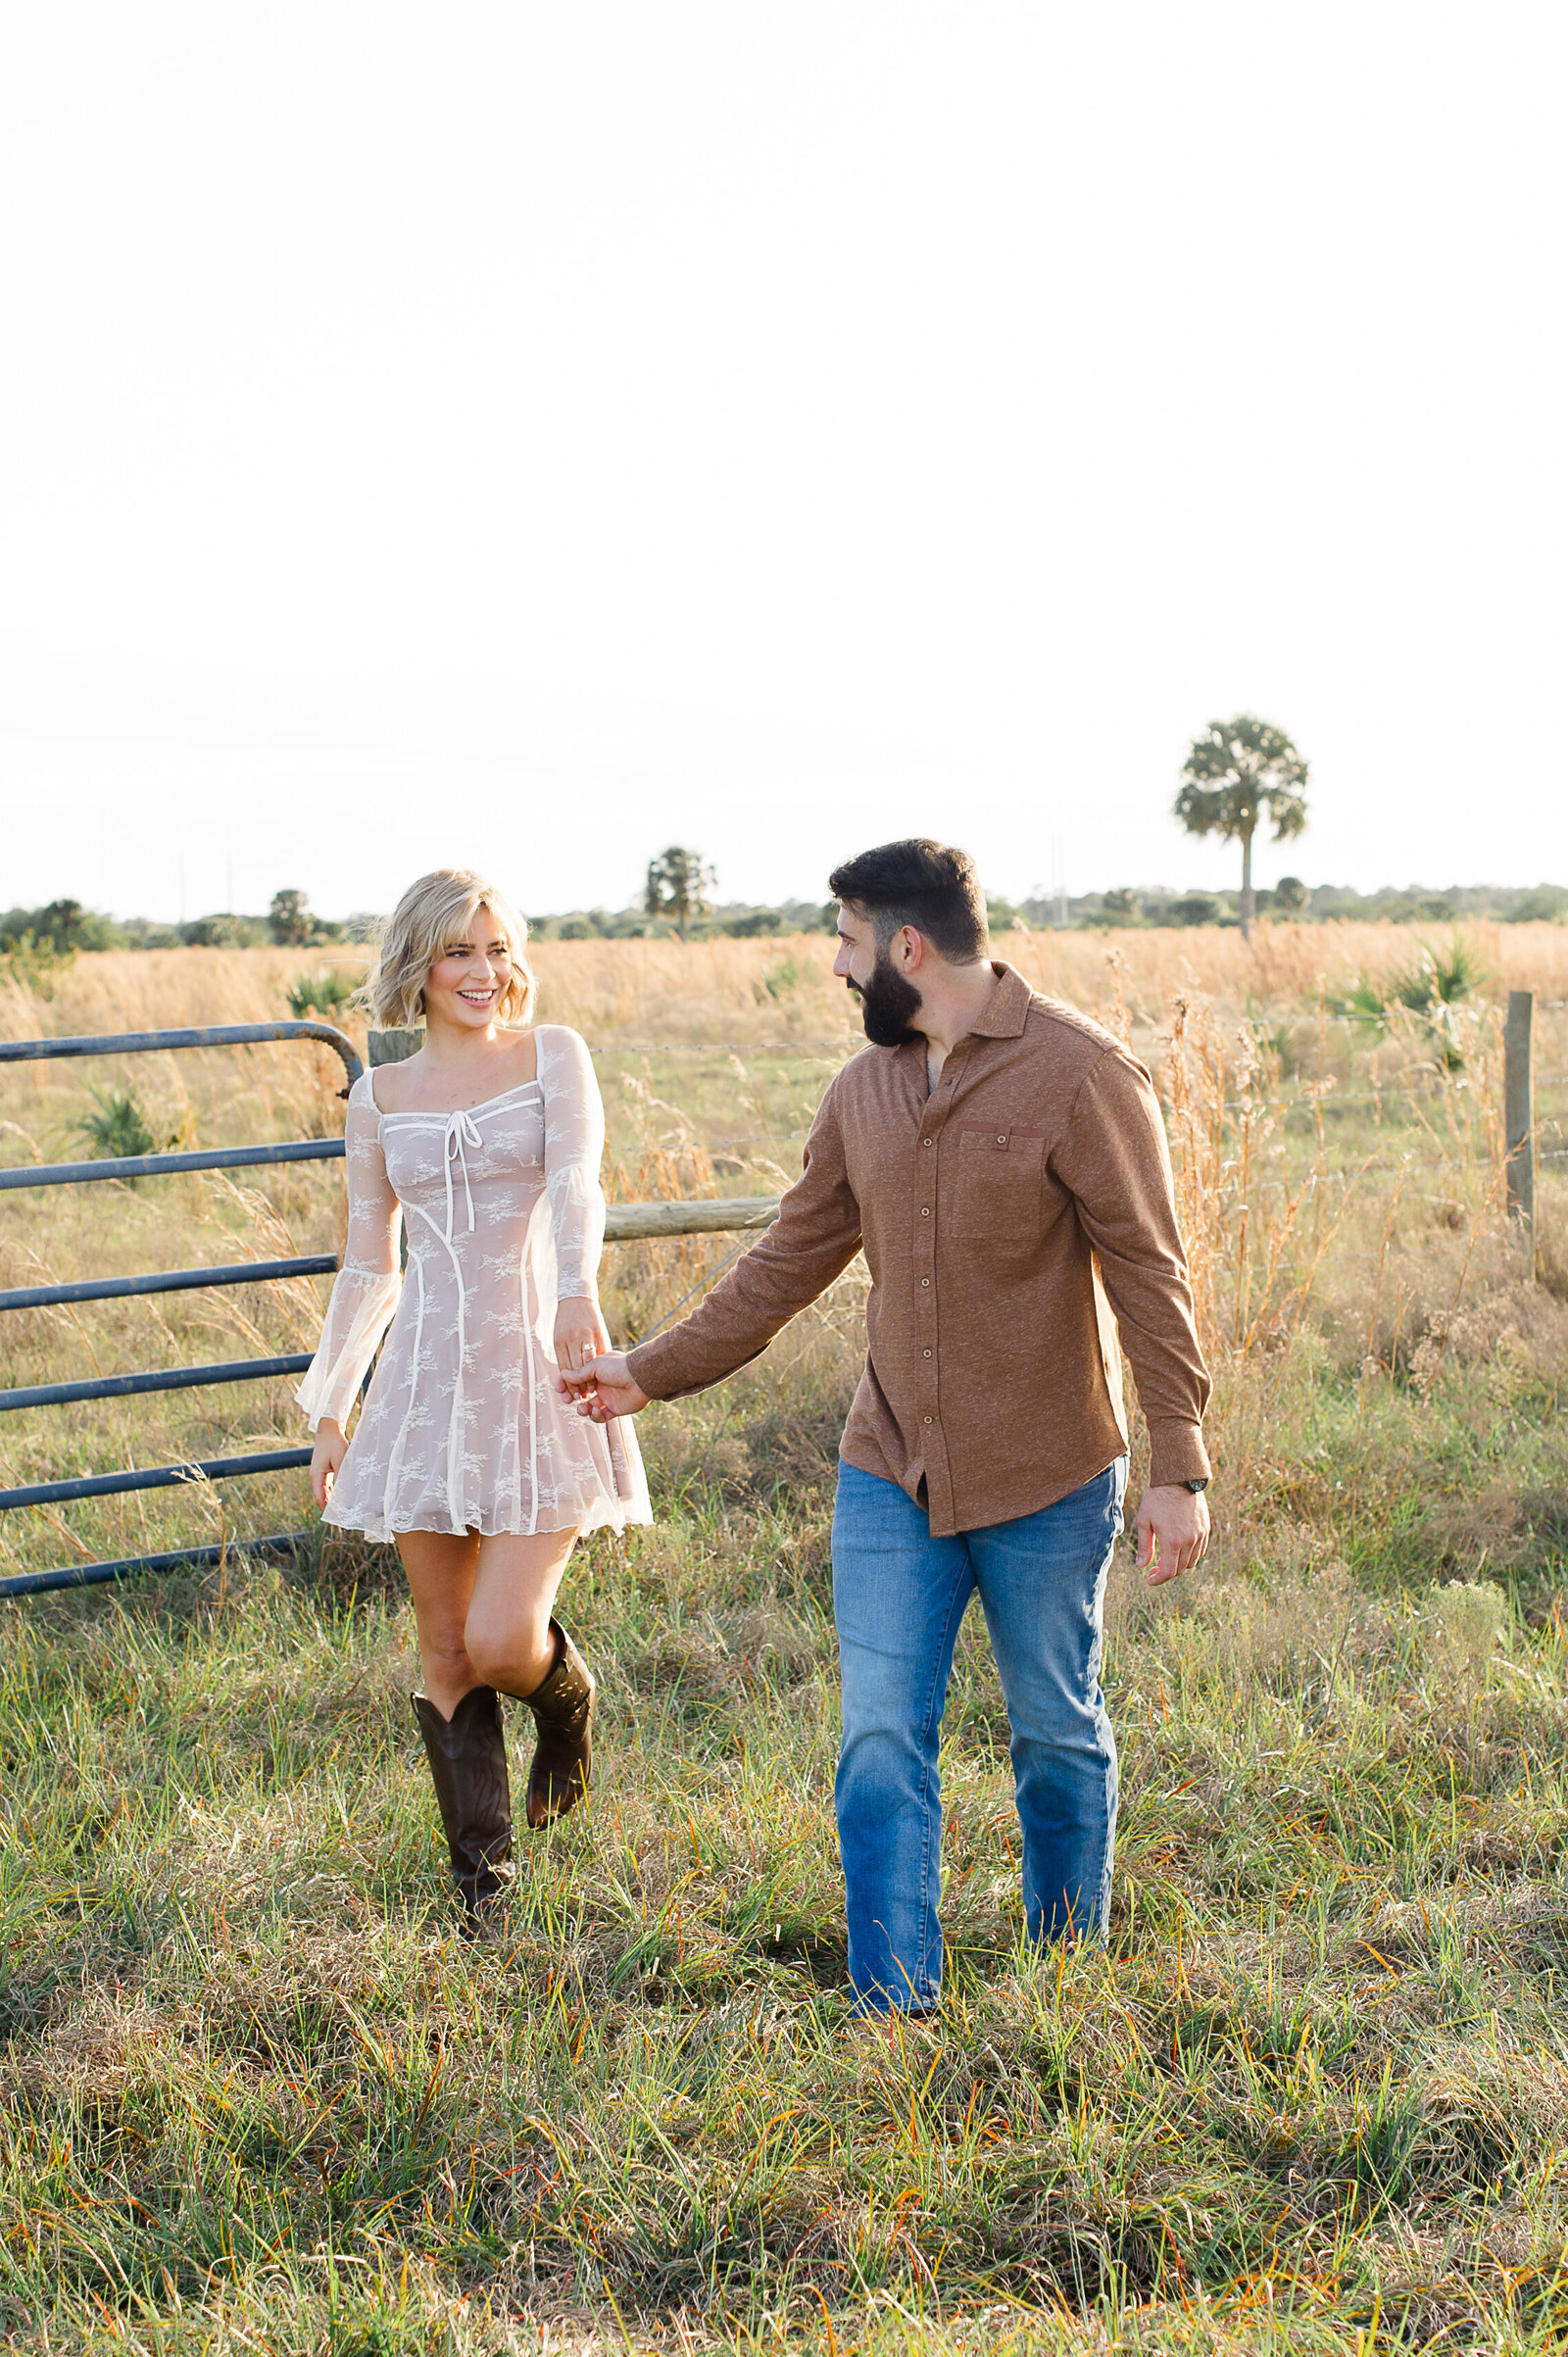 Newly engaged couple walks through a field holding hands and laughing at each other at sunset